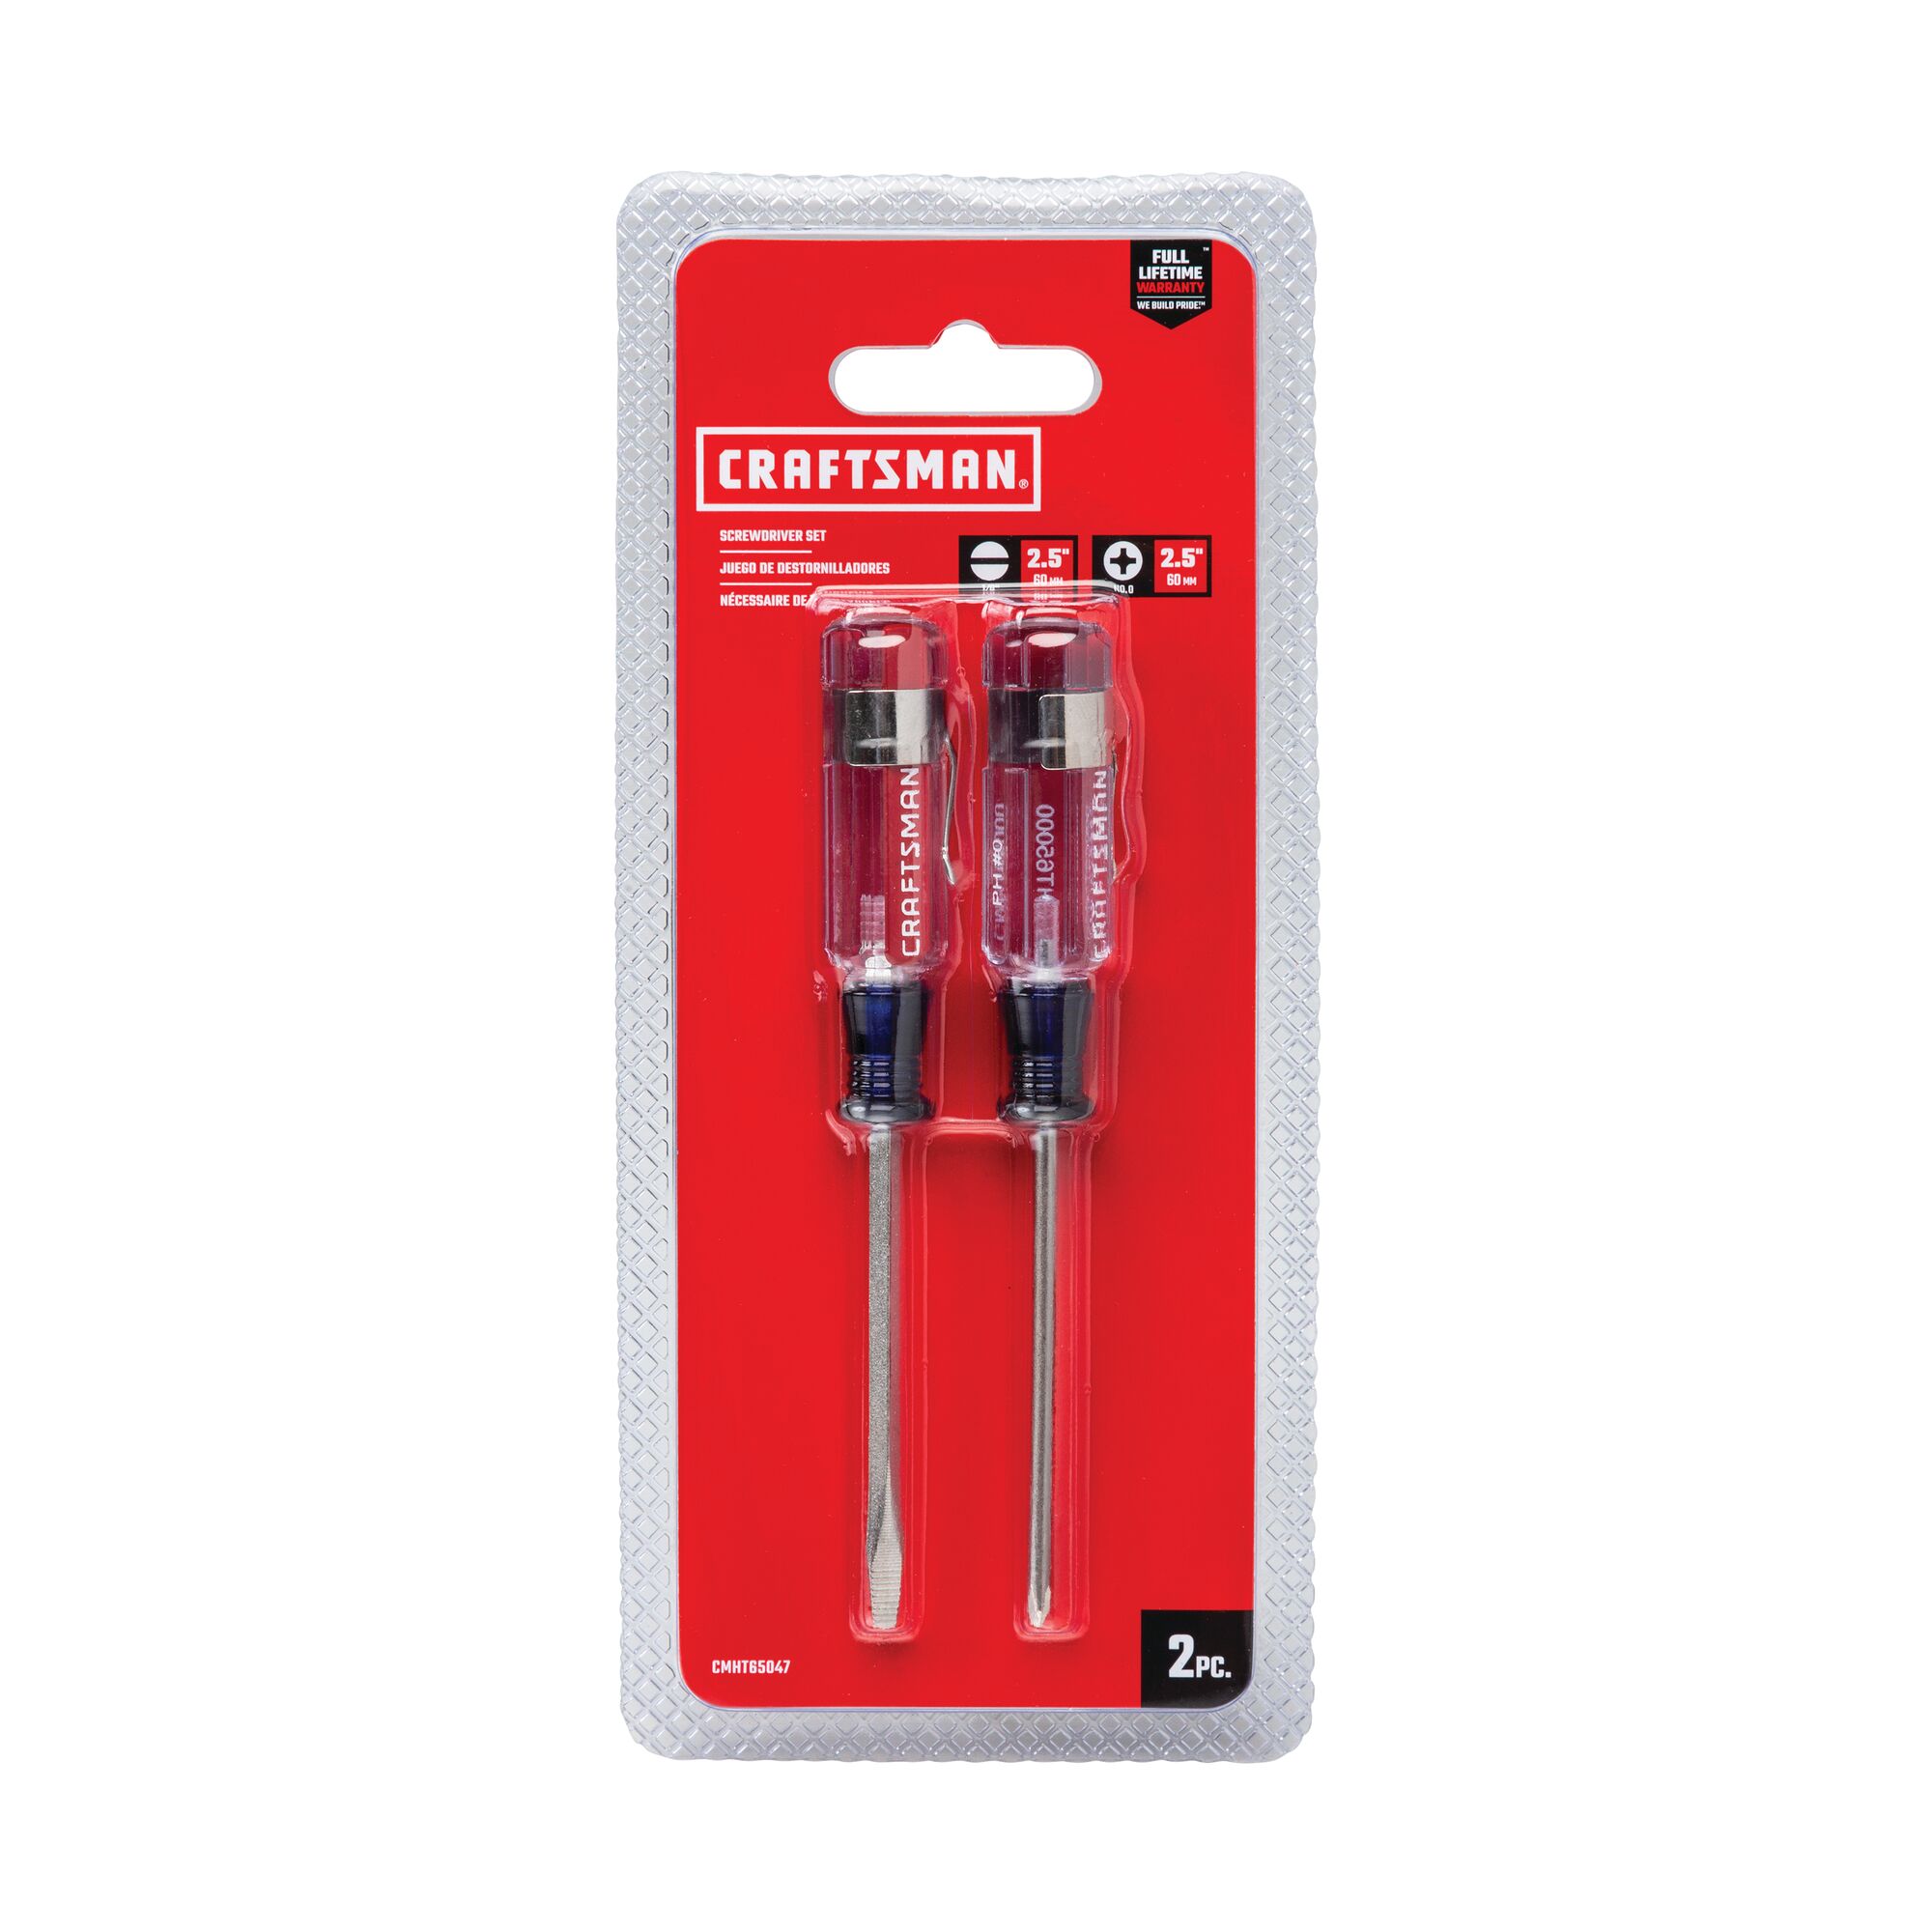 2 piece Acetate ScrewDriver Pocket Set in carded blister packaging.